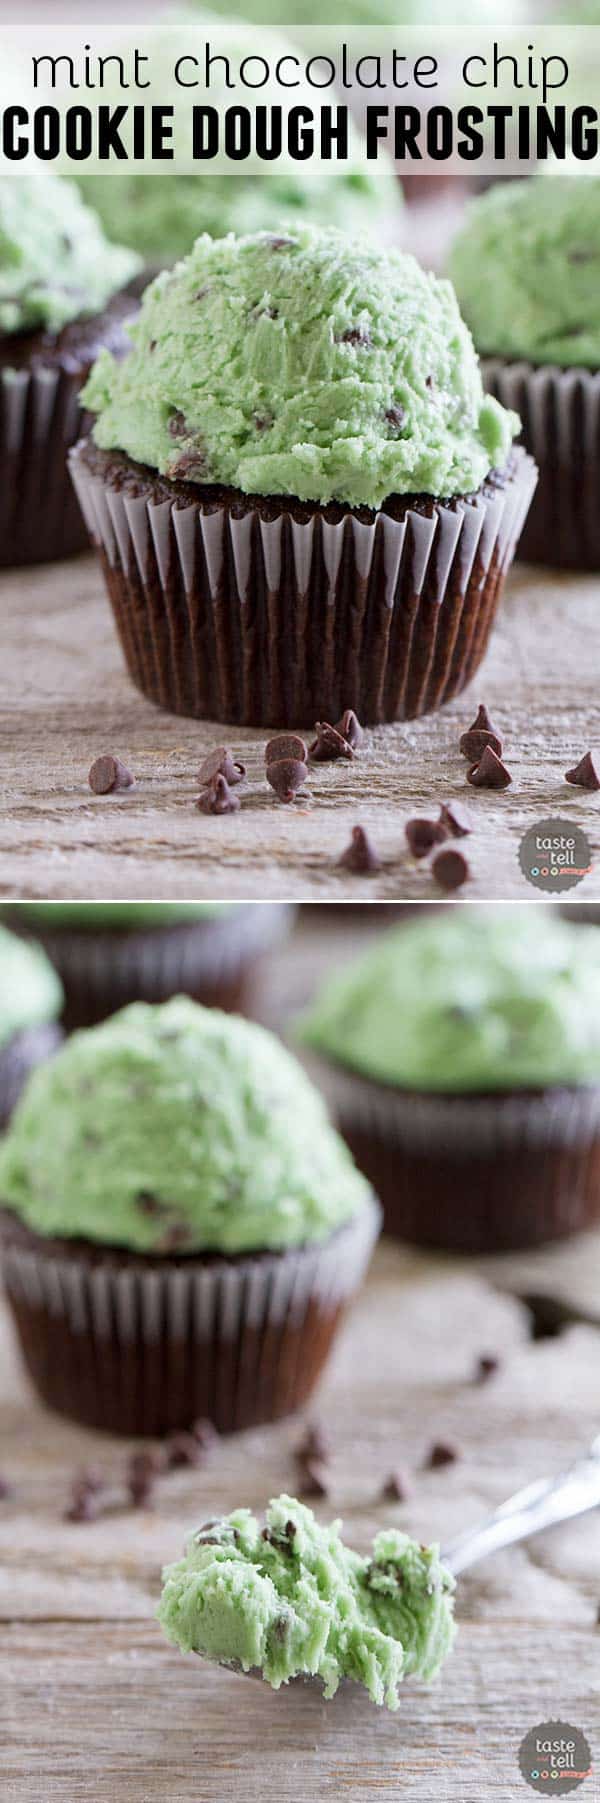 The flavors of mint chocolate chip ice cream meets cookie dough in this delicious frosting that mint lovers will go crazy for.